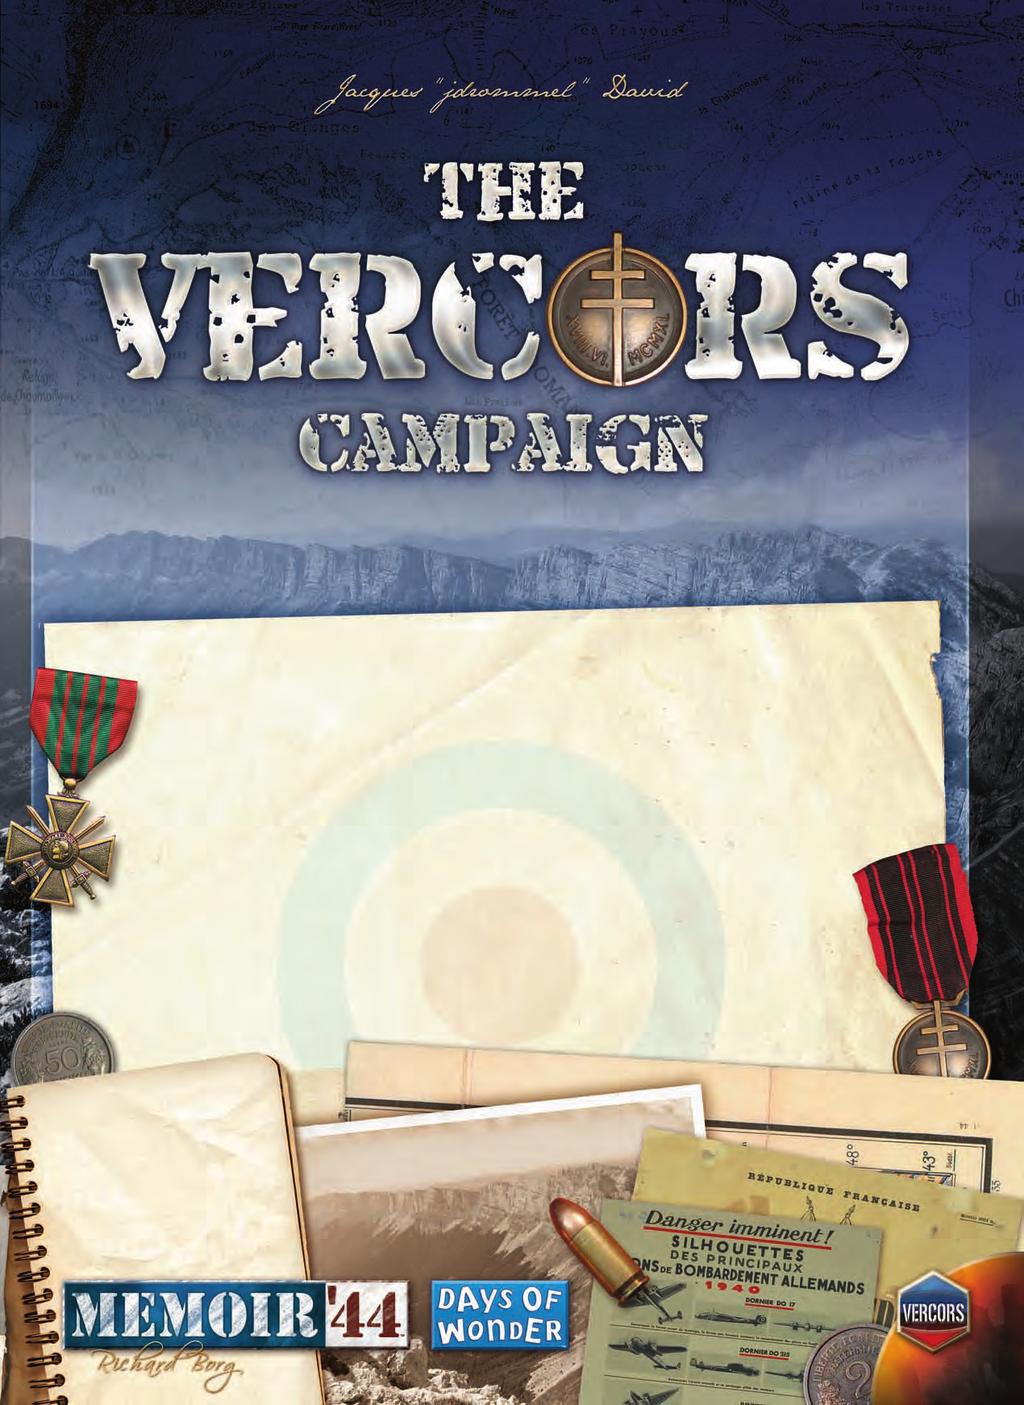 This promotional campaign for Memoir '44 invites you to relive the darkest, most harrowing, yet glorious hours of the French Resistance as "maquisards" battle overwhelming SS forces on the Vercors